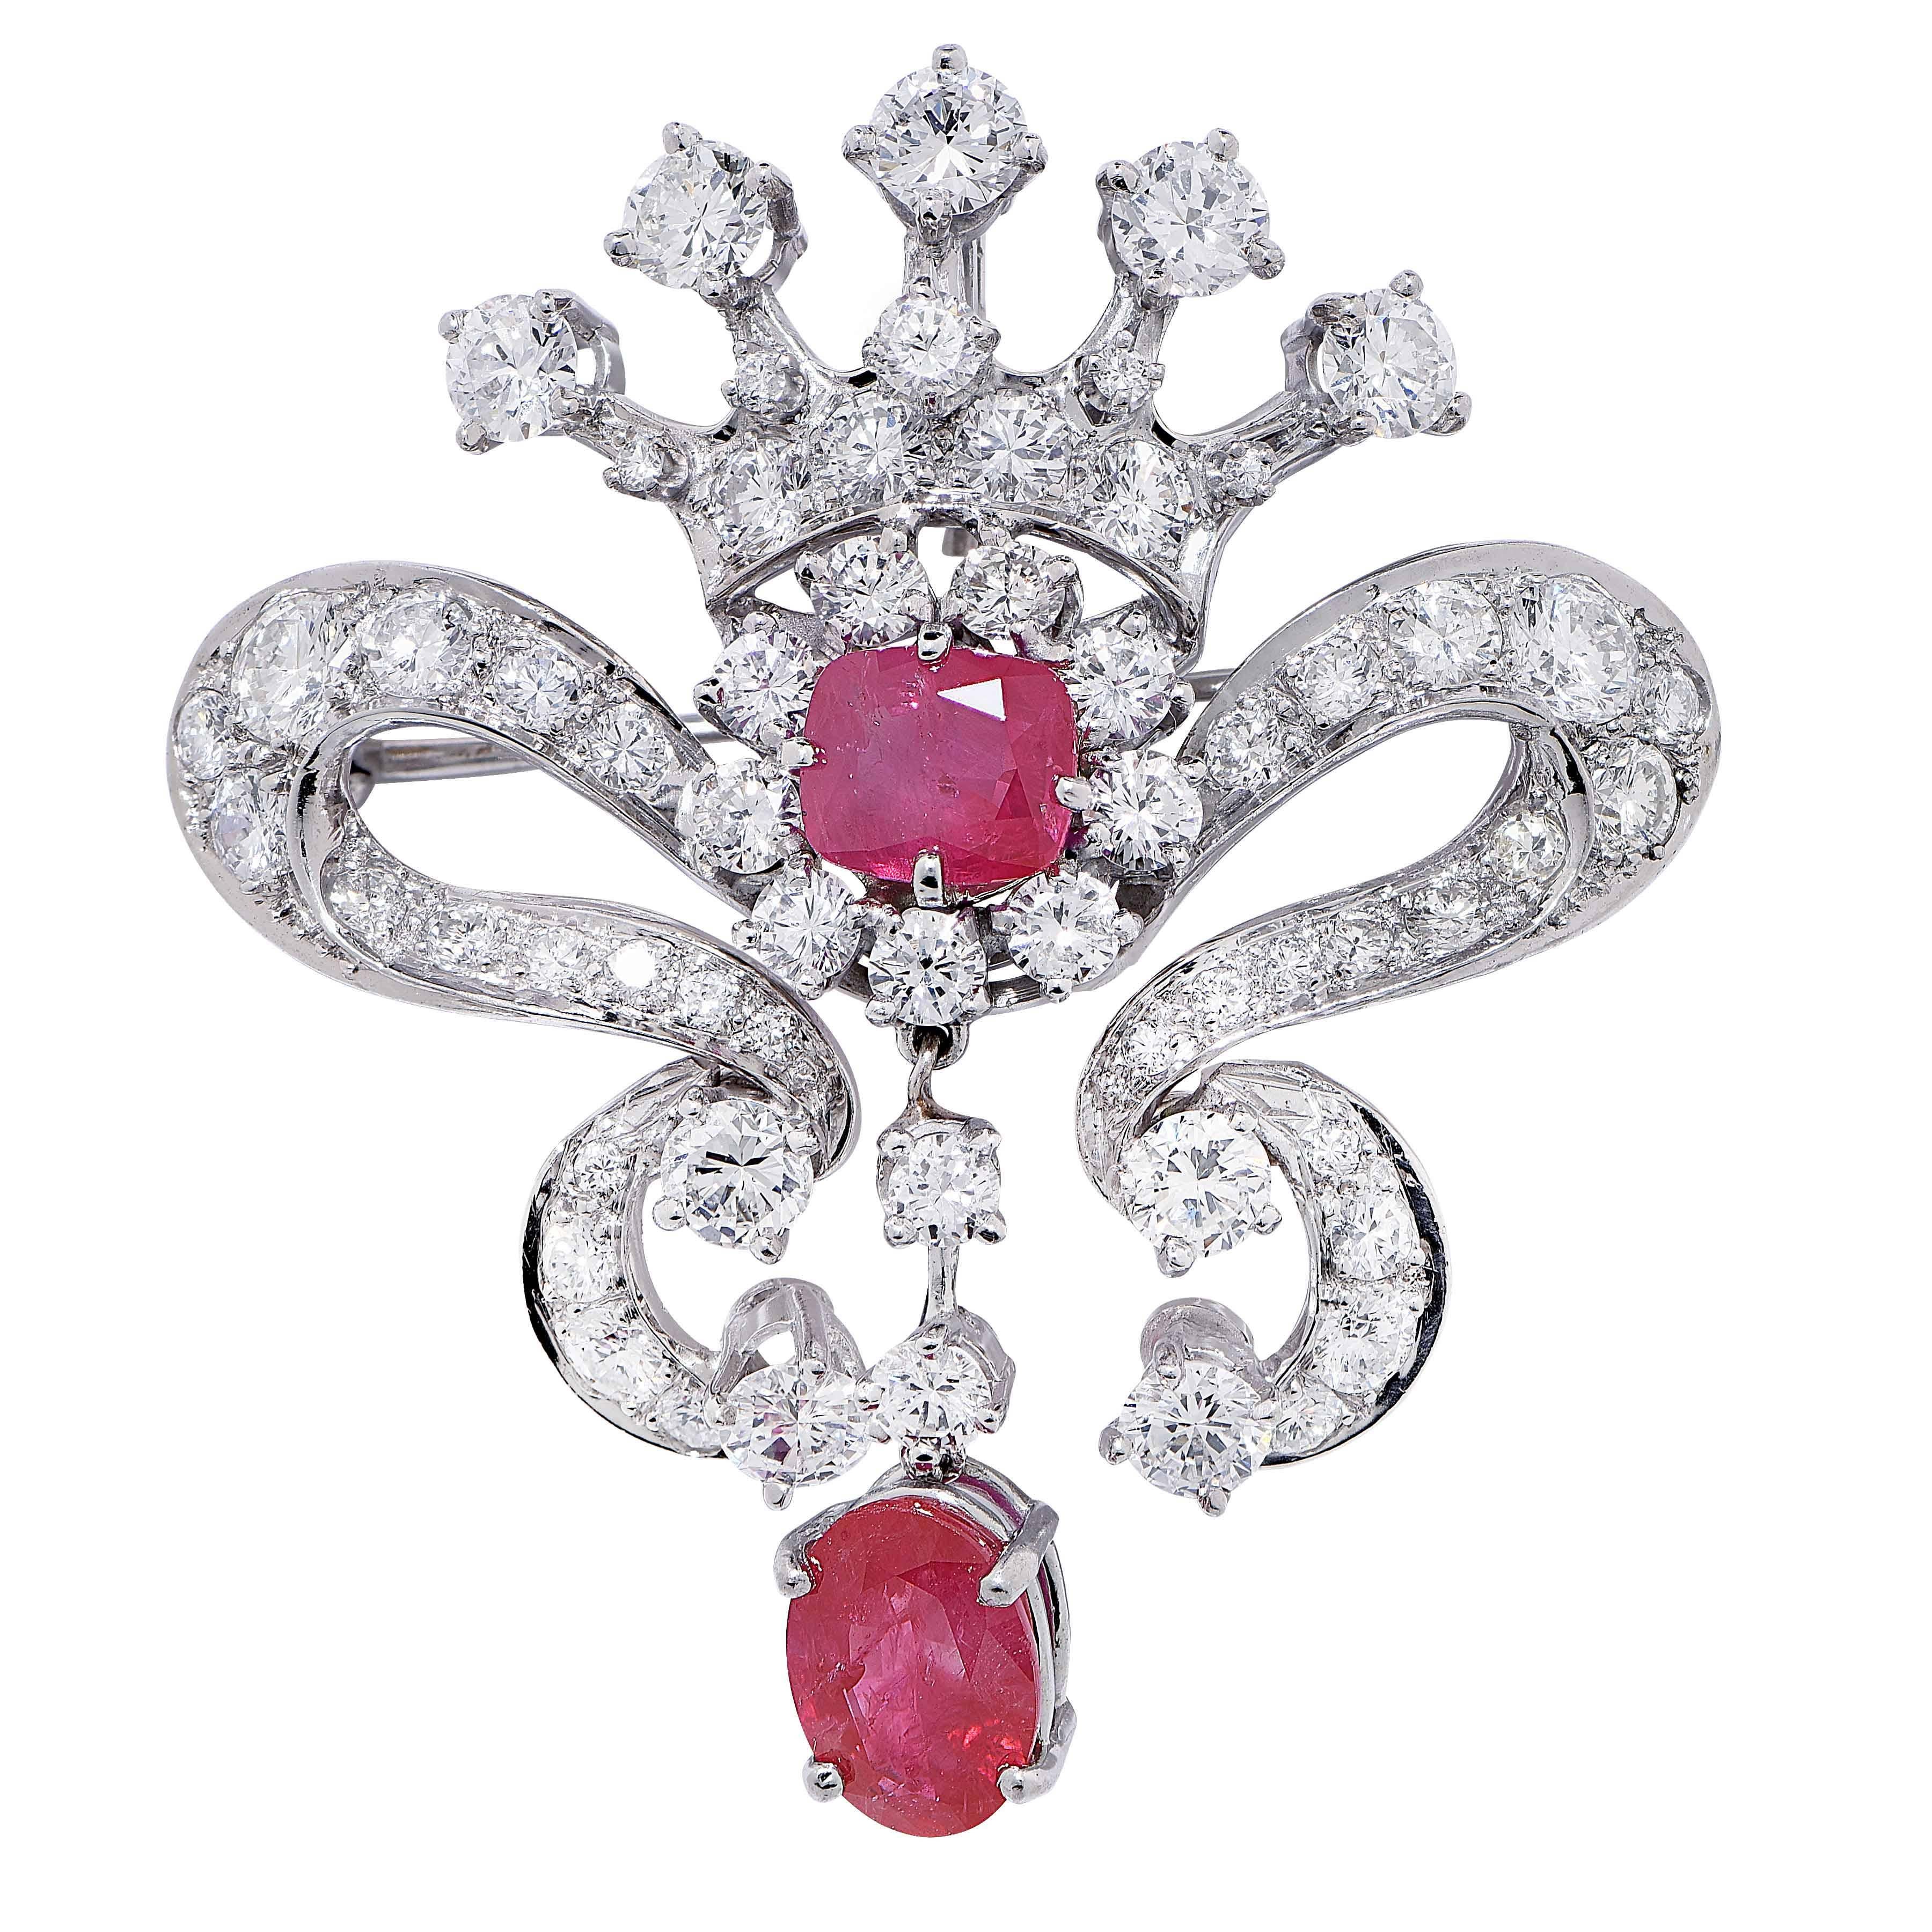 Mid Century Open Ribbon design brooch featuring  2 Burmese rubies, one oval and one cushion shaped, weighing approximately 3.70 Cts. in total, and 61 round cut diamonds weighing approximately 6.50 Cts. set in a platinum brooch.

Metal Type: Platinum